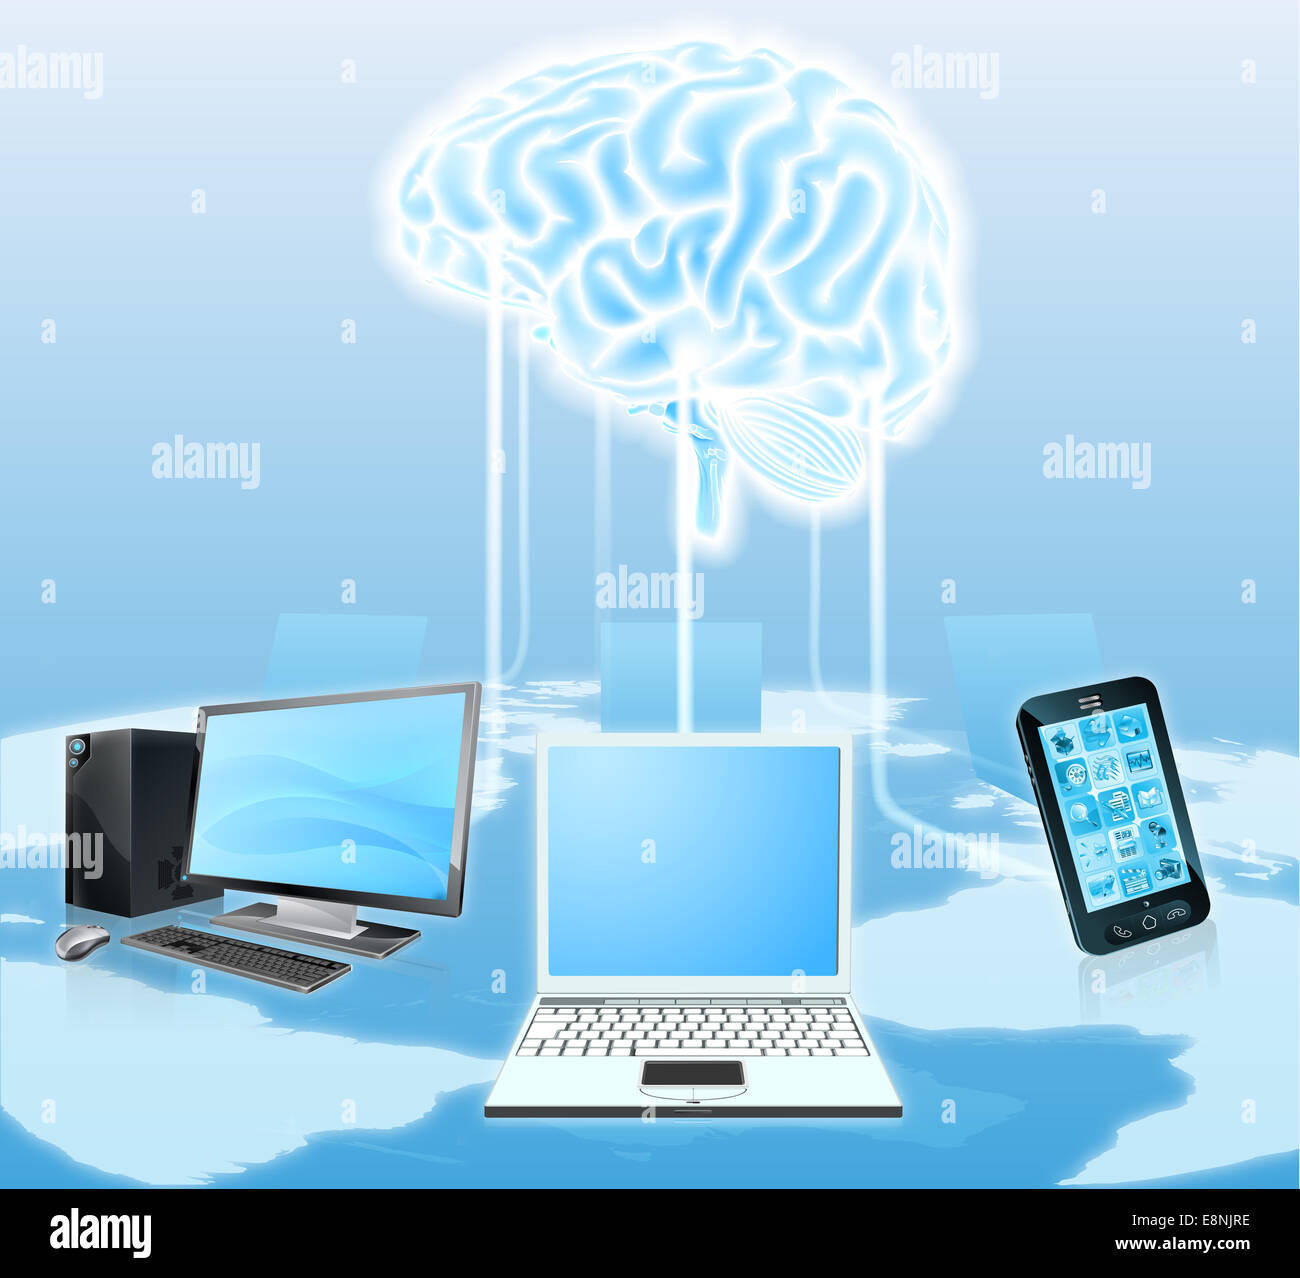 A conceptual illustration of media devices like mobile phones and laptop computers connected to a  central brain. Could be a con Stock Photo